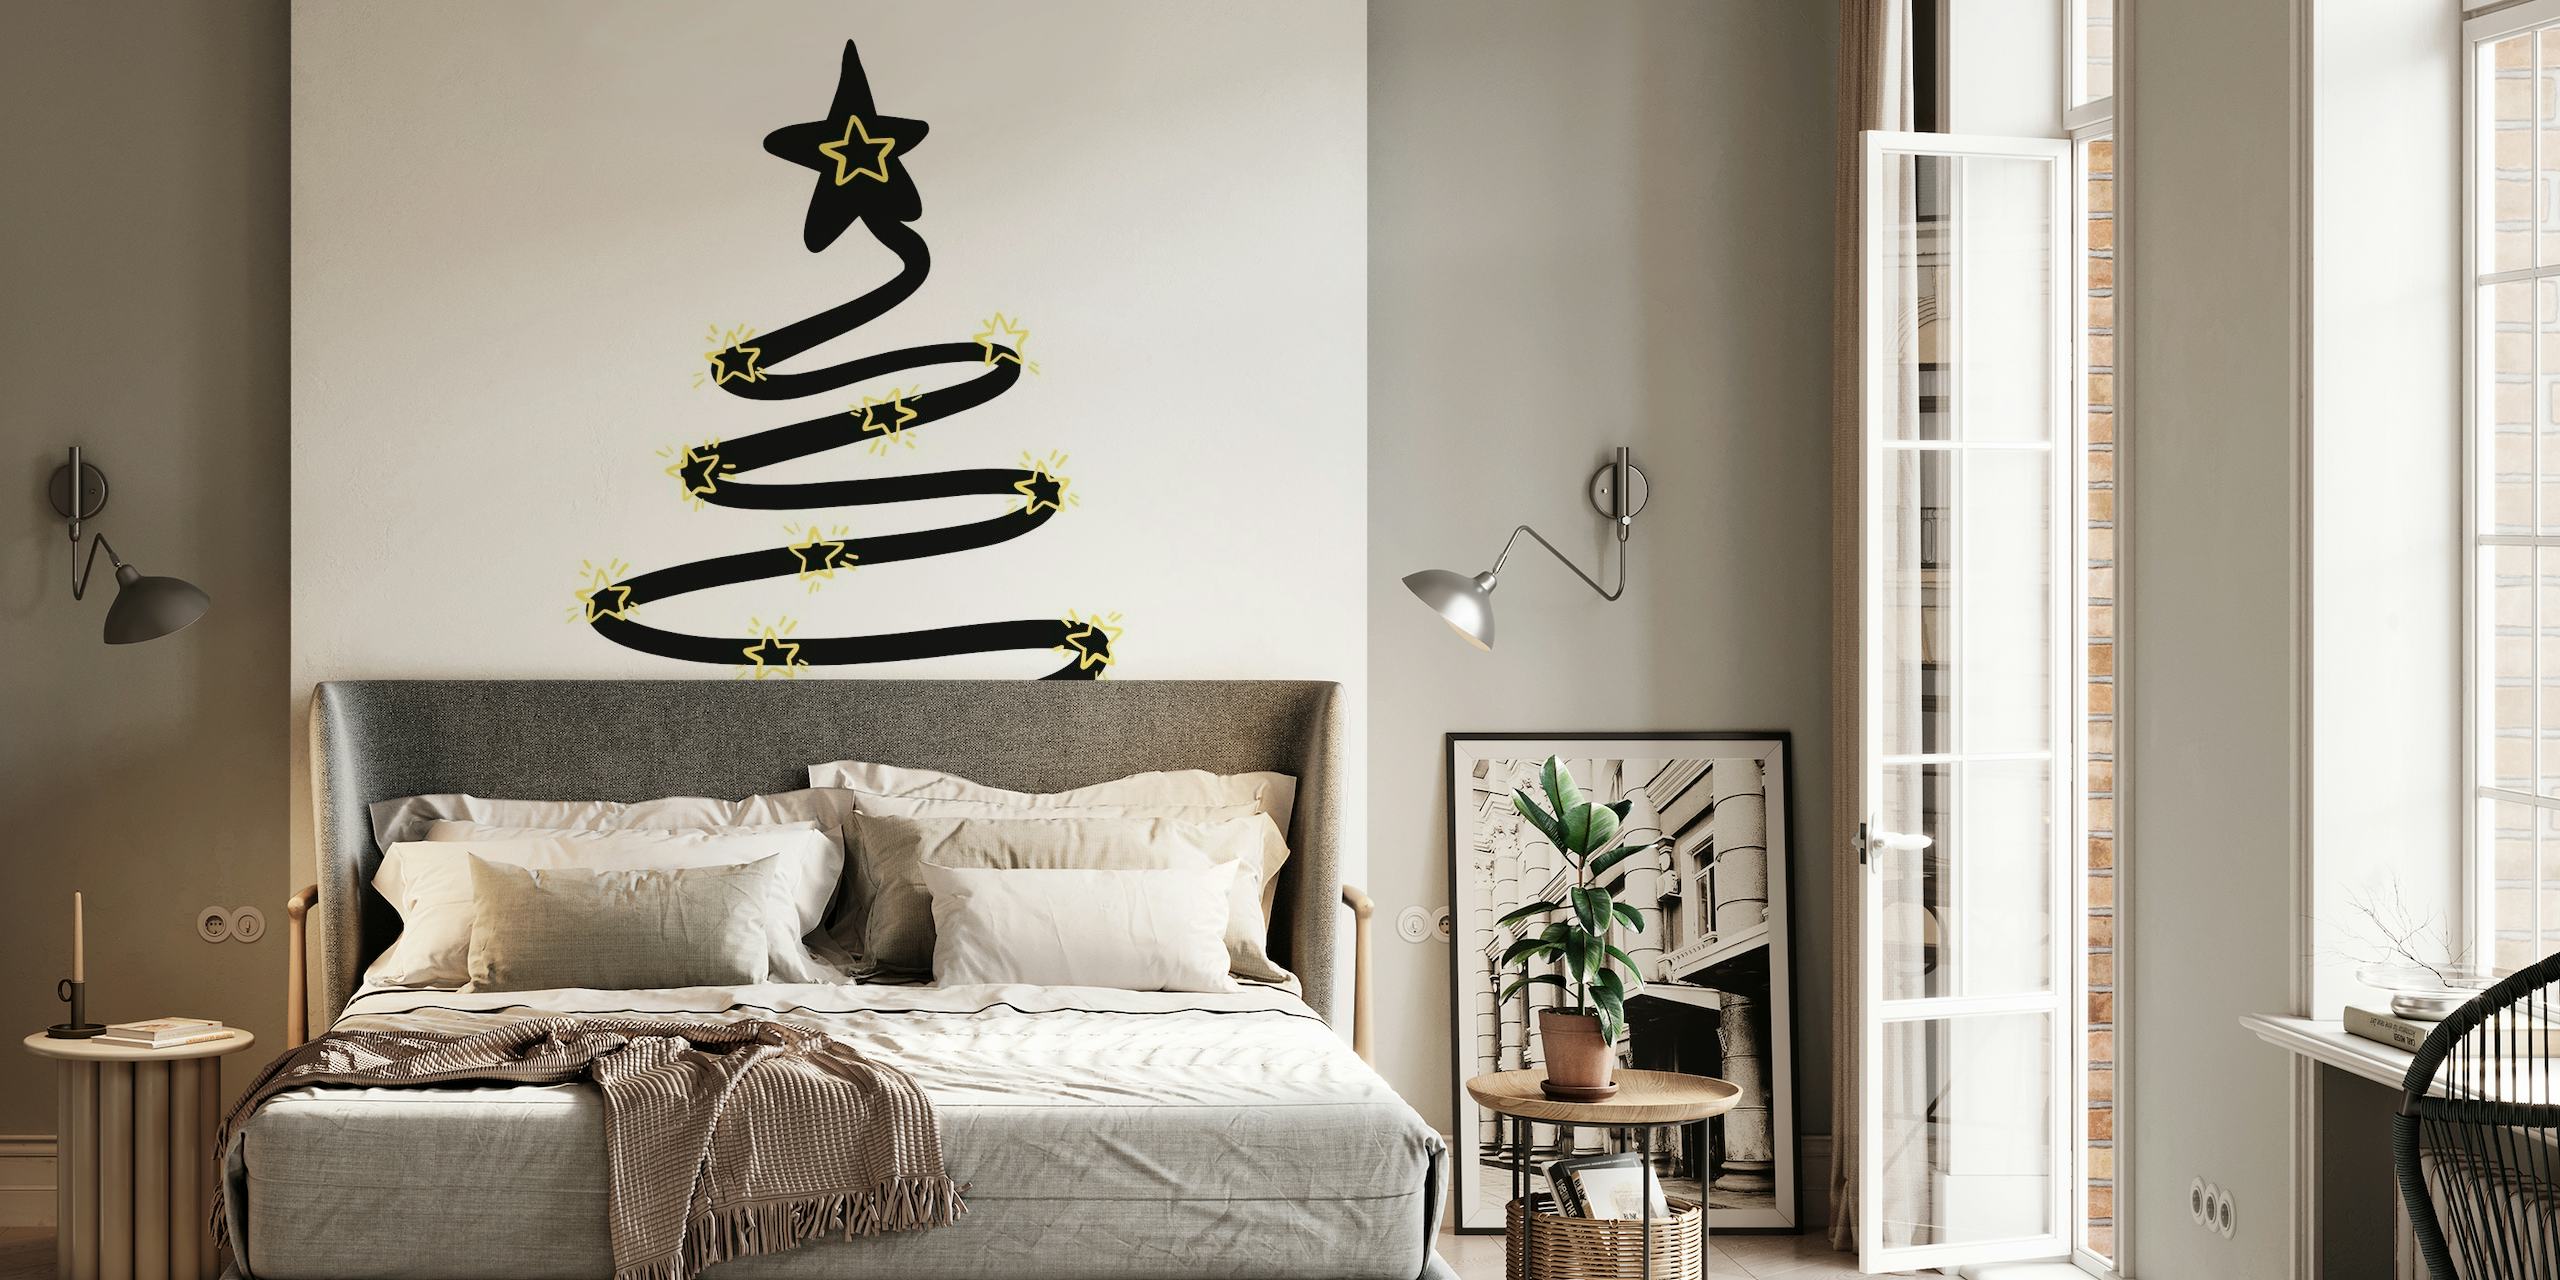 Minimalist abstract Christmas tree wall mural with golden accents and a star topper